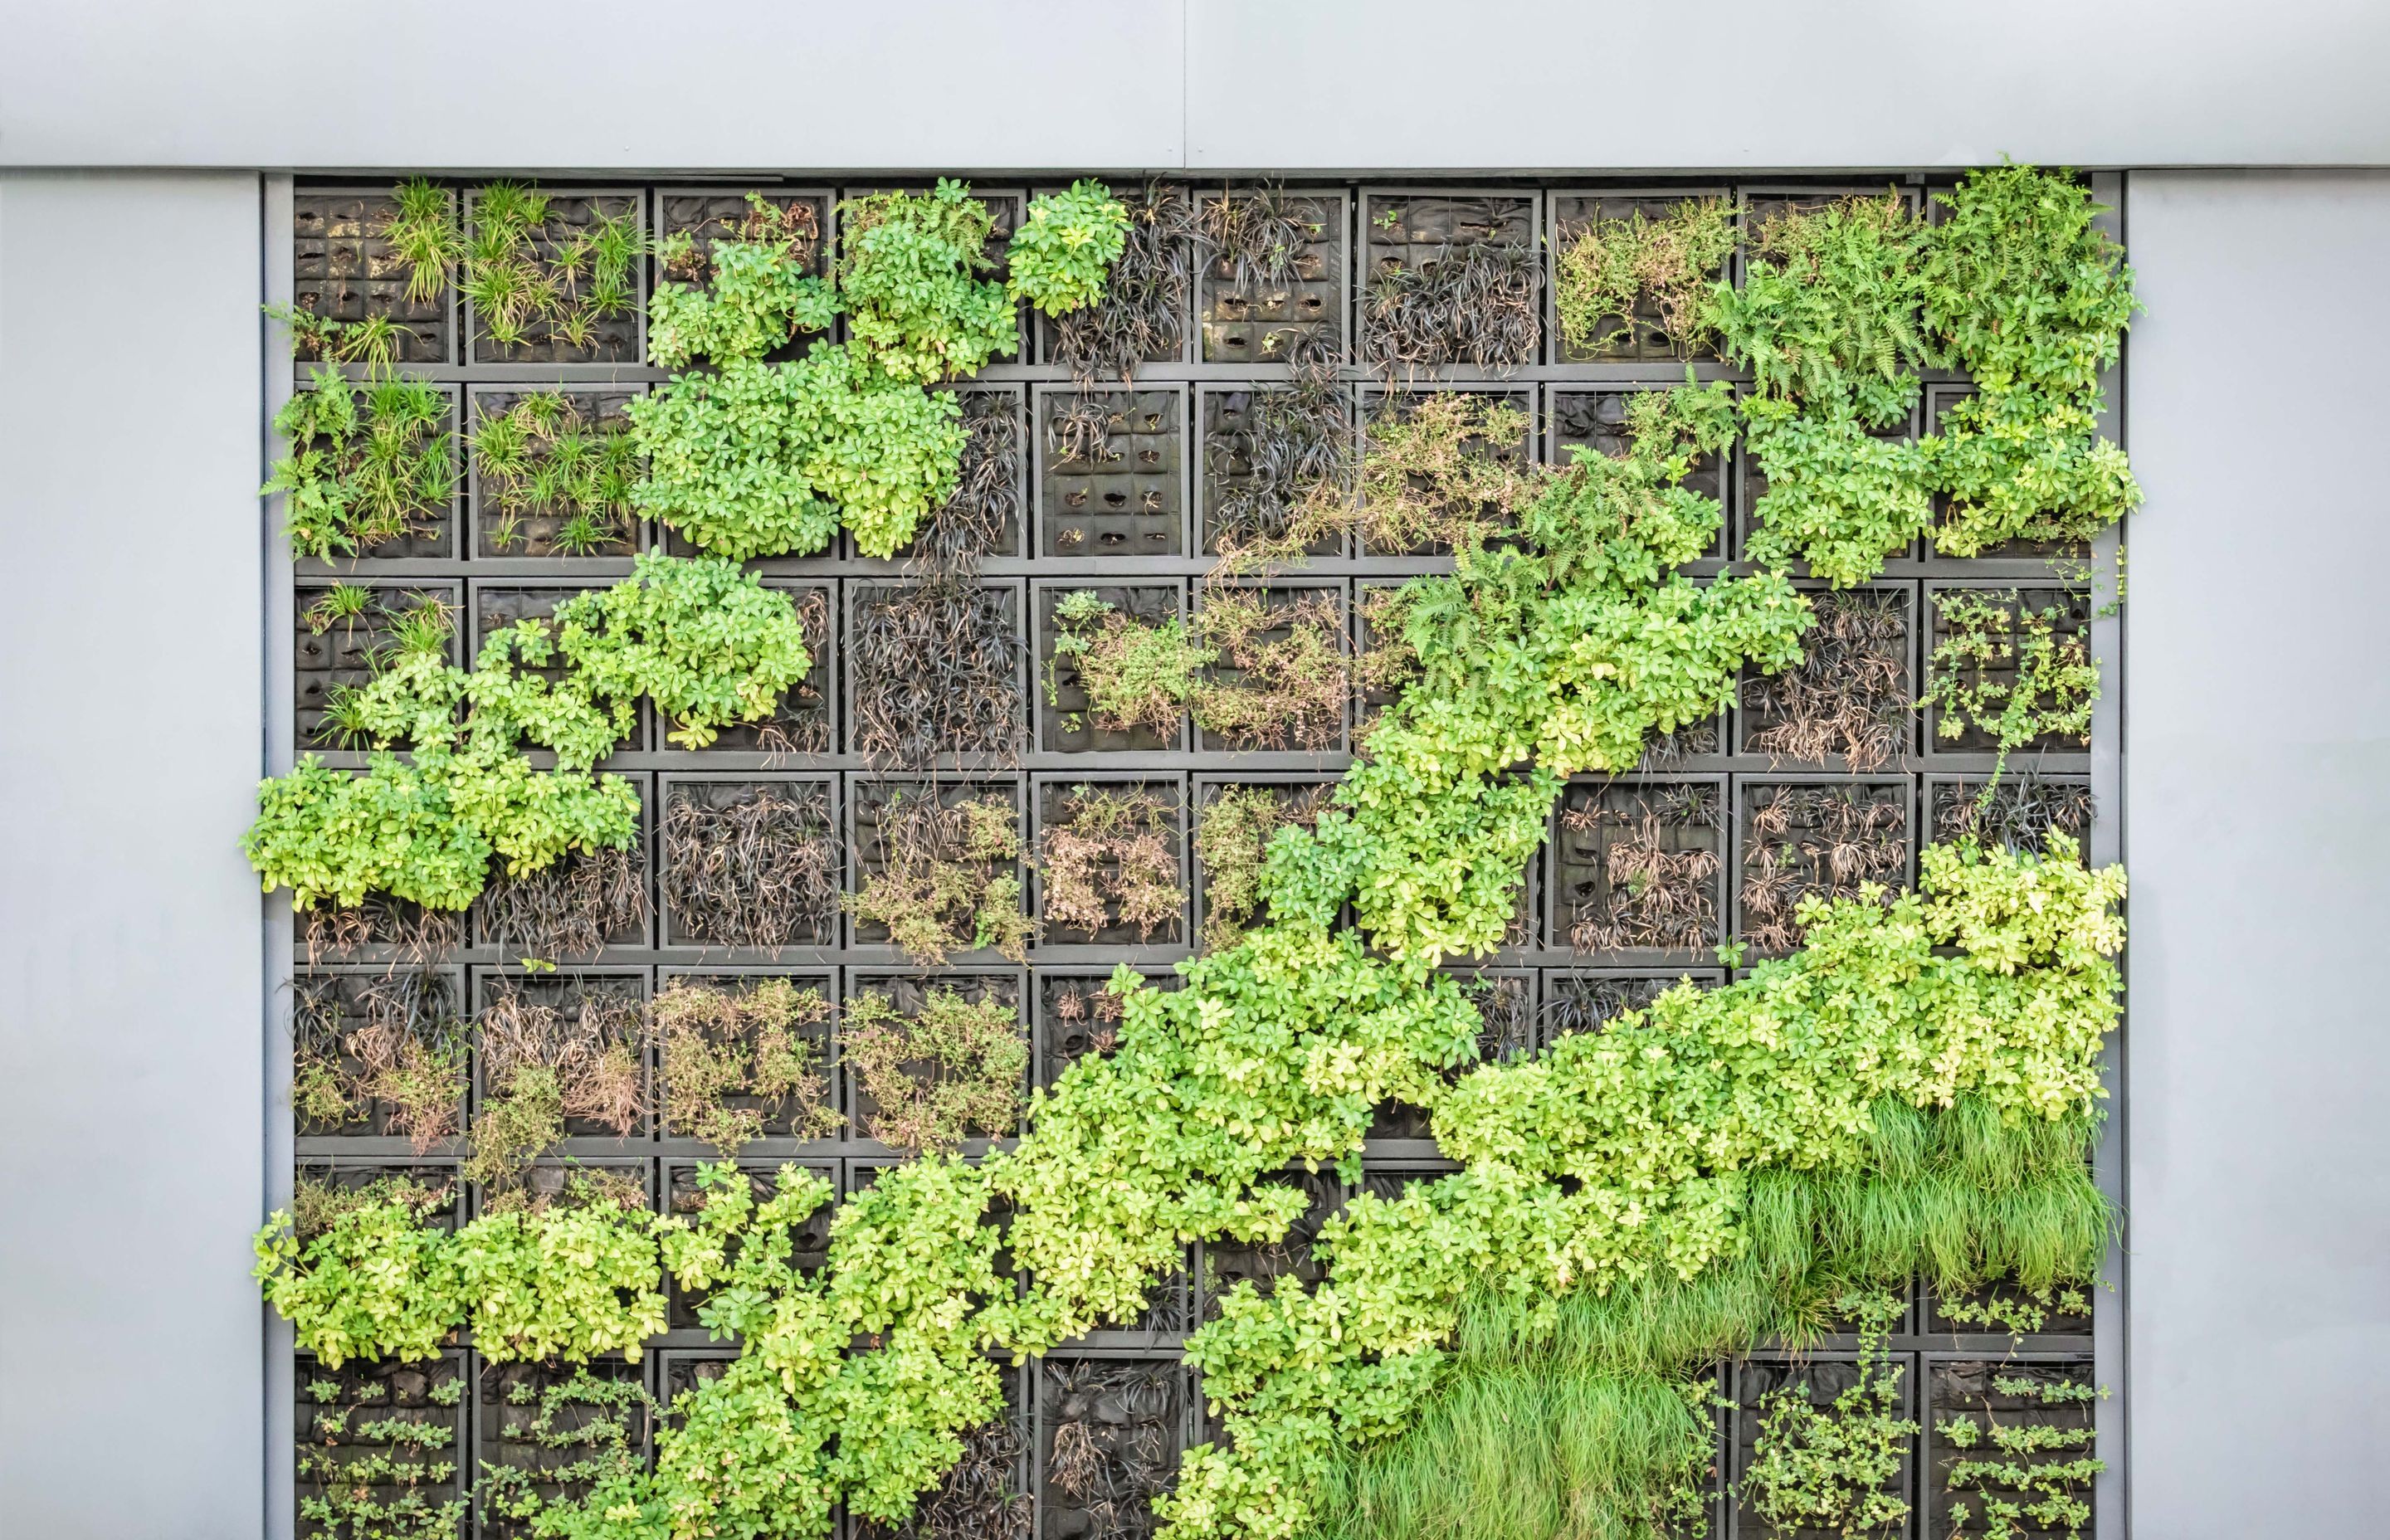 Living walls have spaces in them from which plants can grow, without the base of the plants needing to touch the ground.